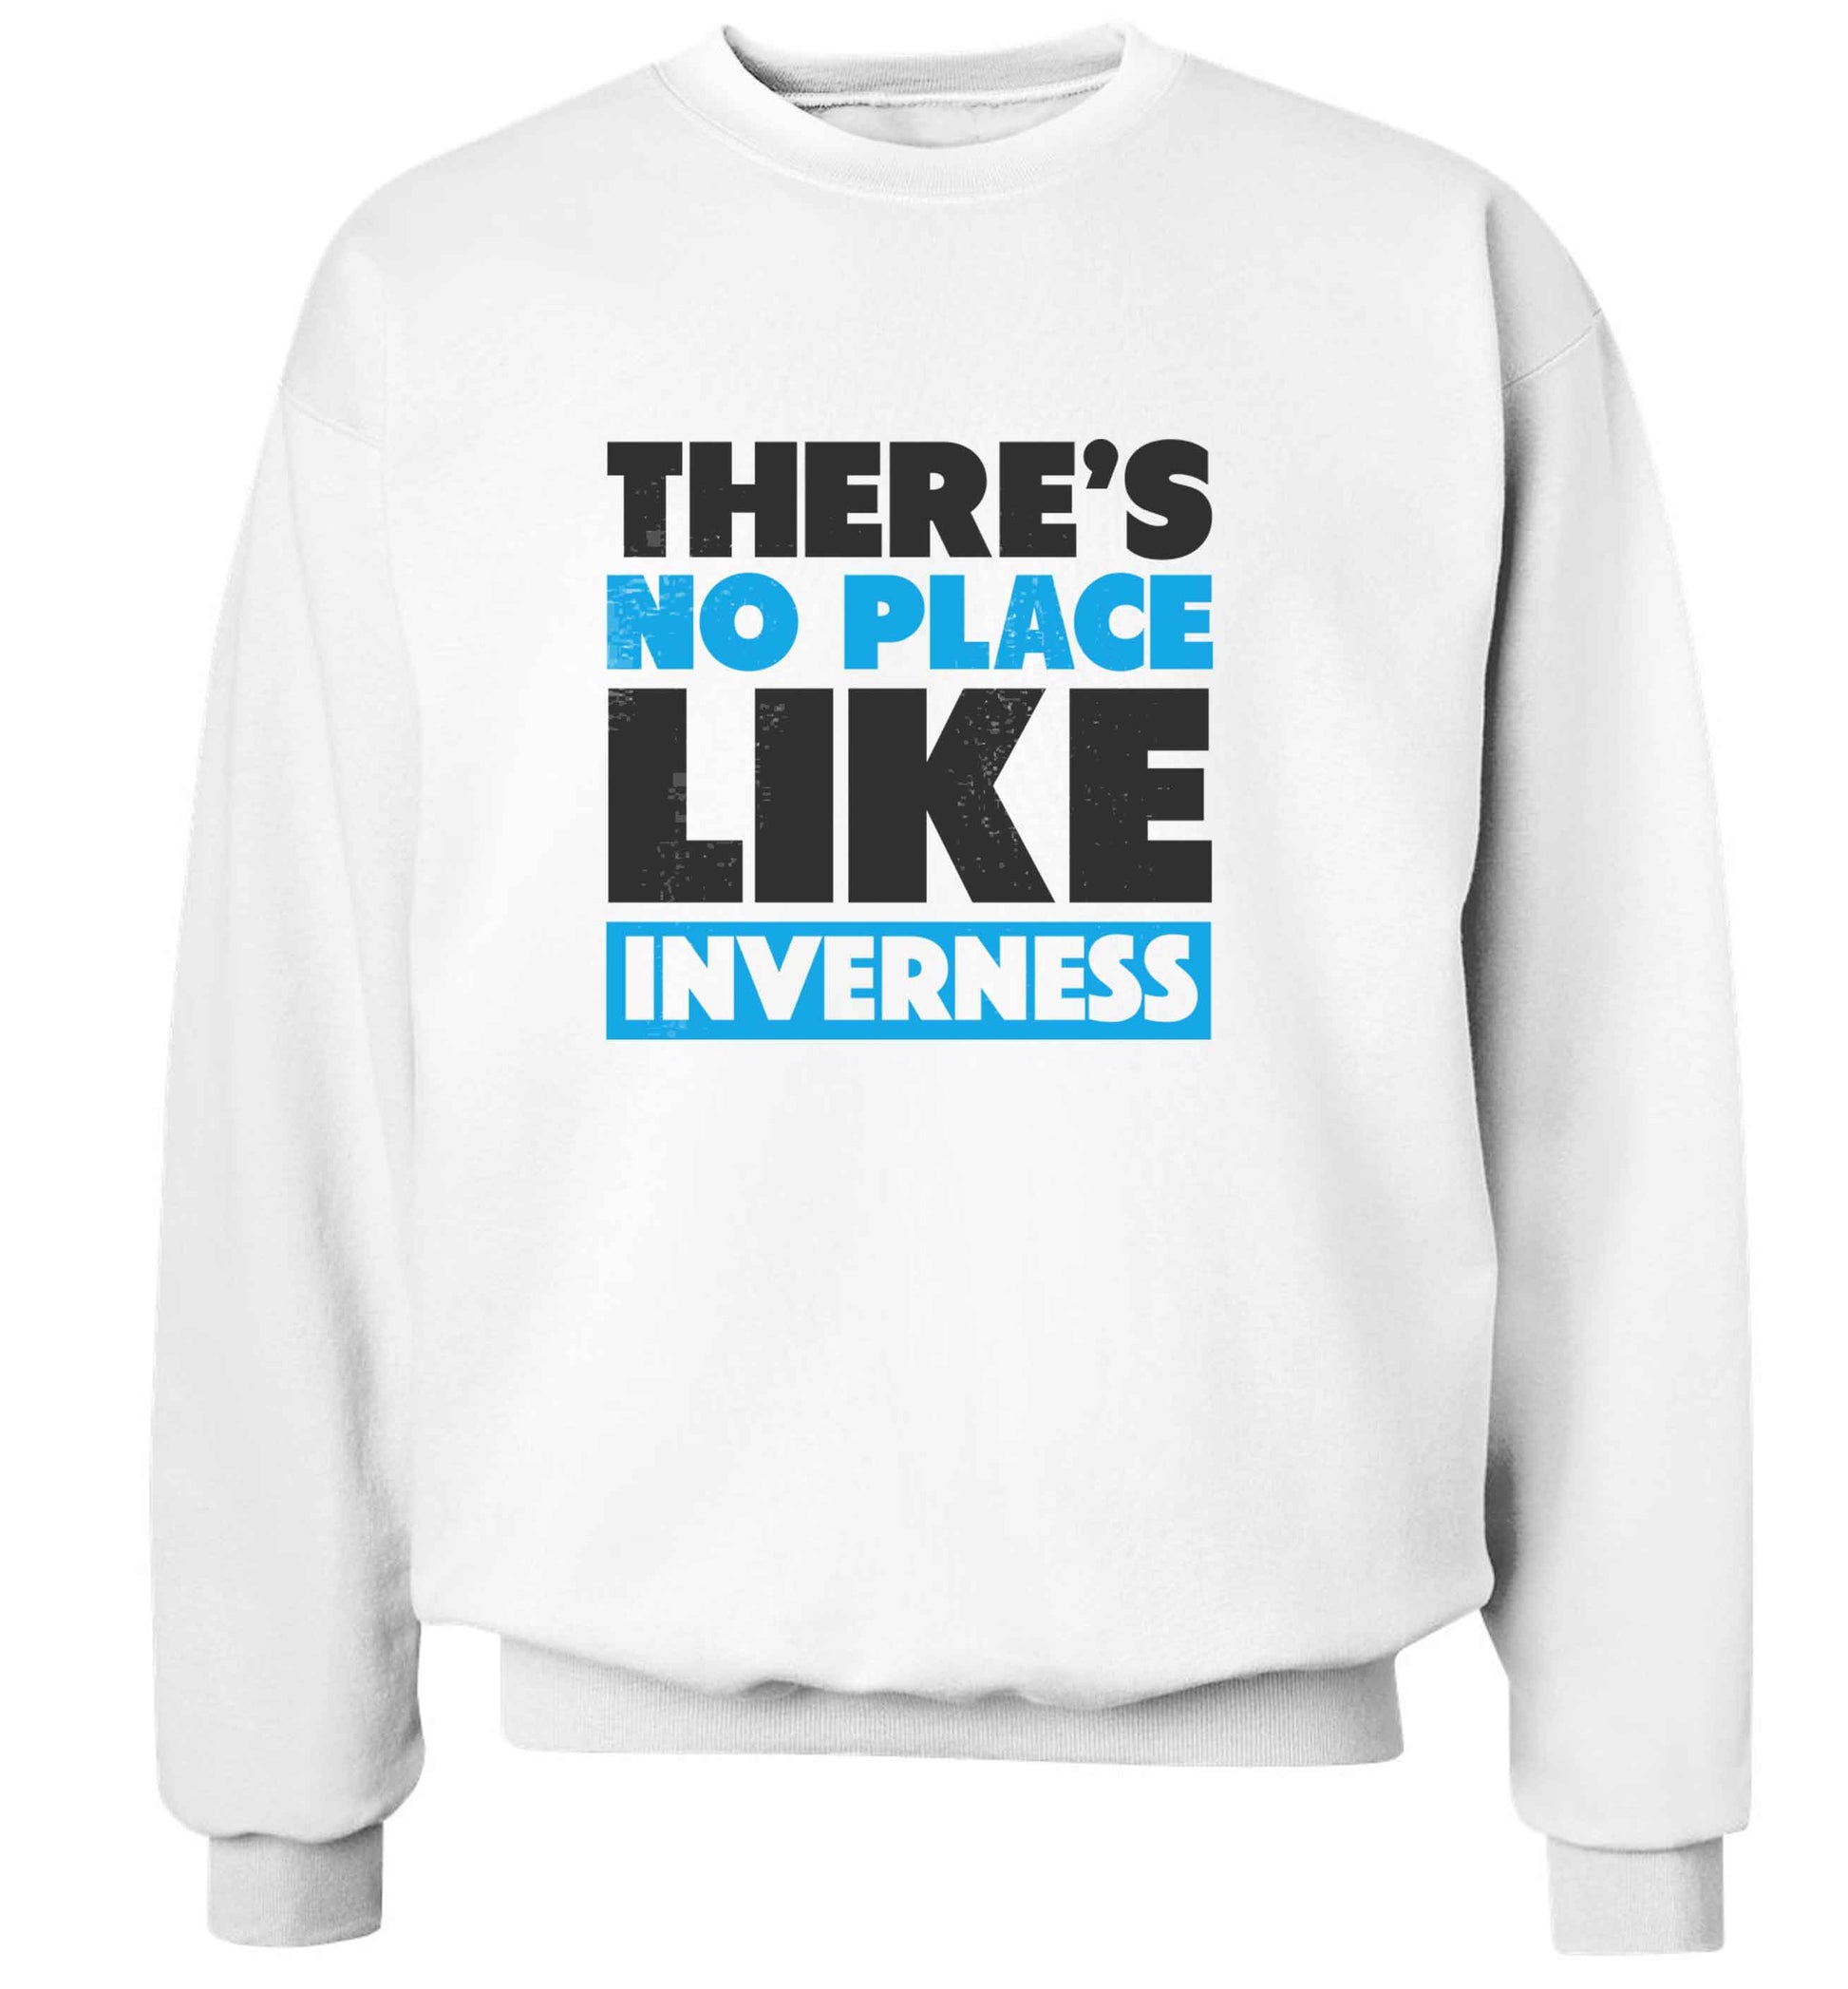 There's no place like Inverness adult's unisex white sweater 2XL